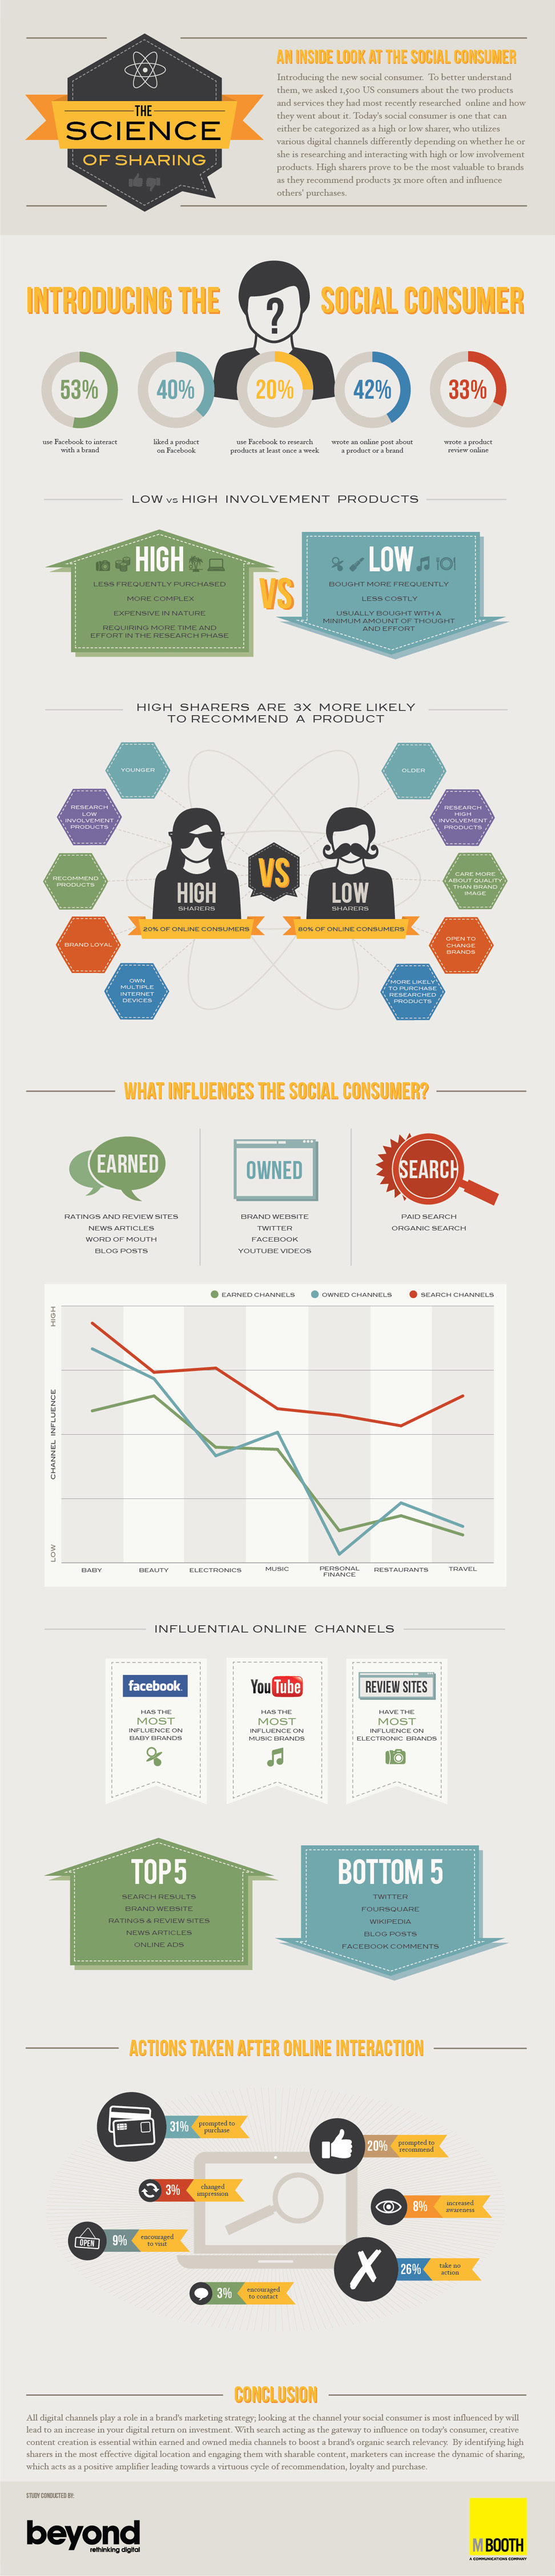 The Science Of Sharing And The Social Consumer - Infographic